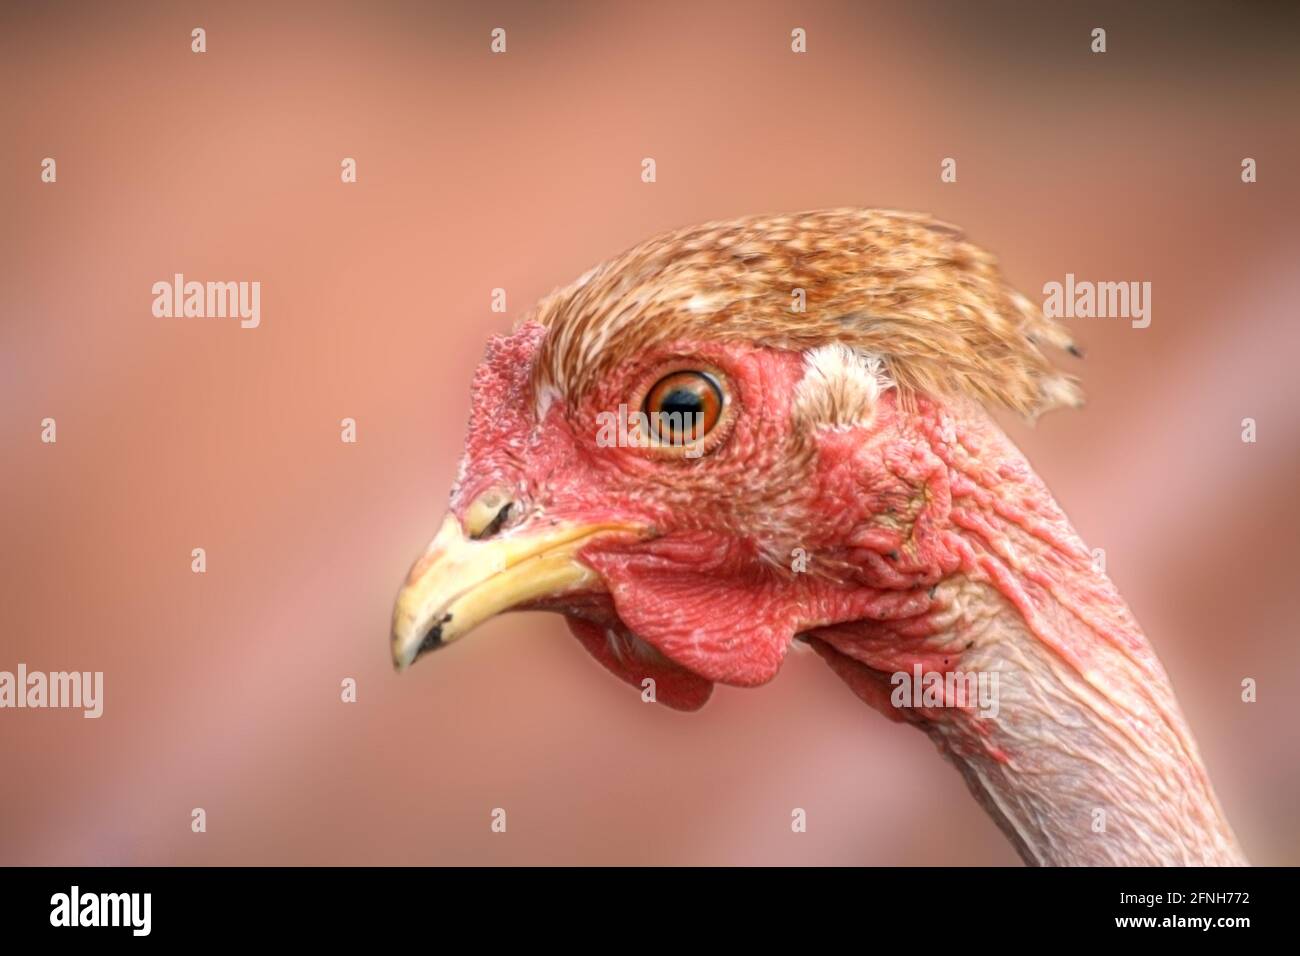 Chicken fowl of Transylvanian naked neck breed Stock Photo